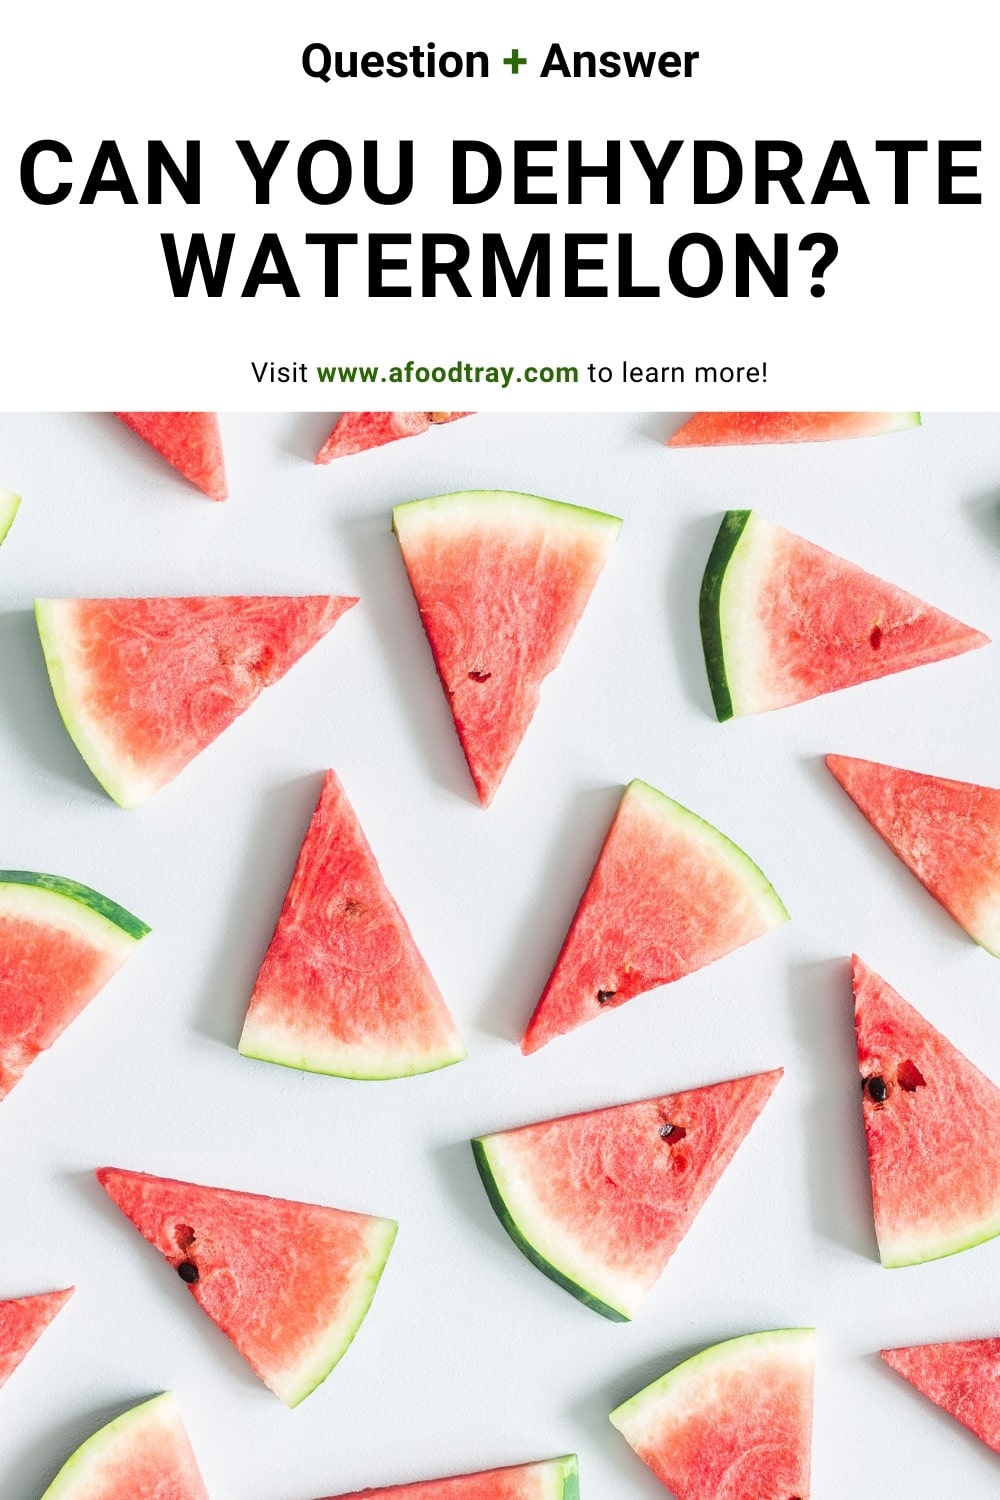 Can you dehydrate watermelon?